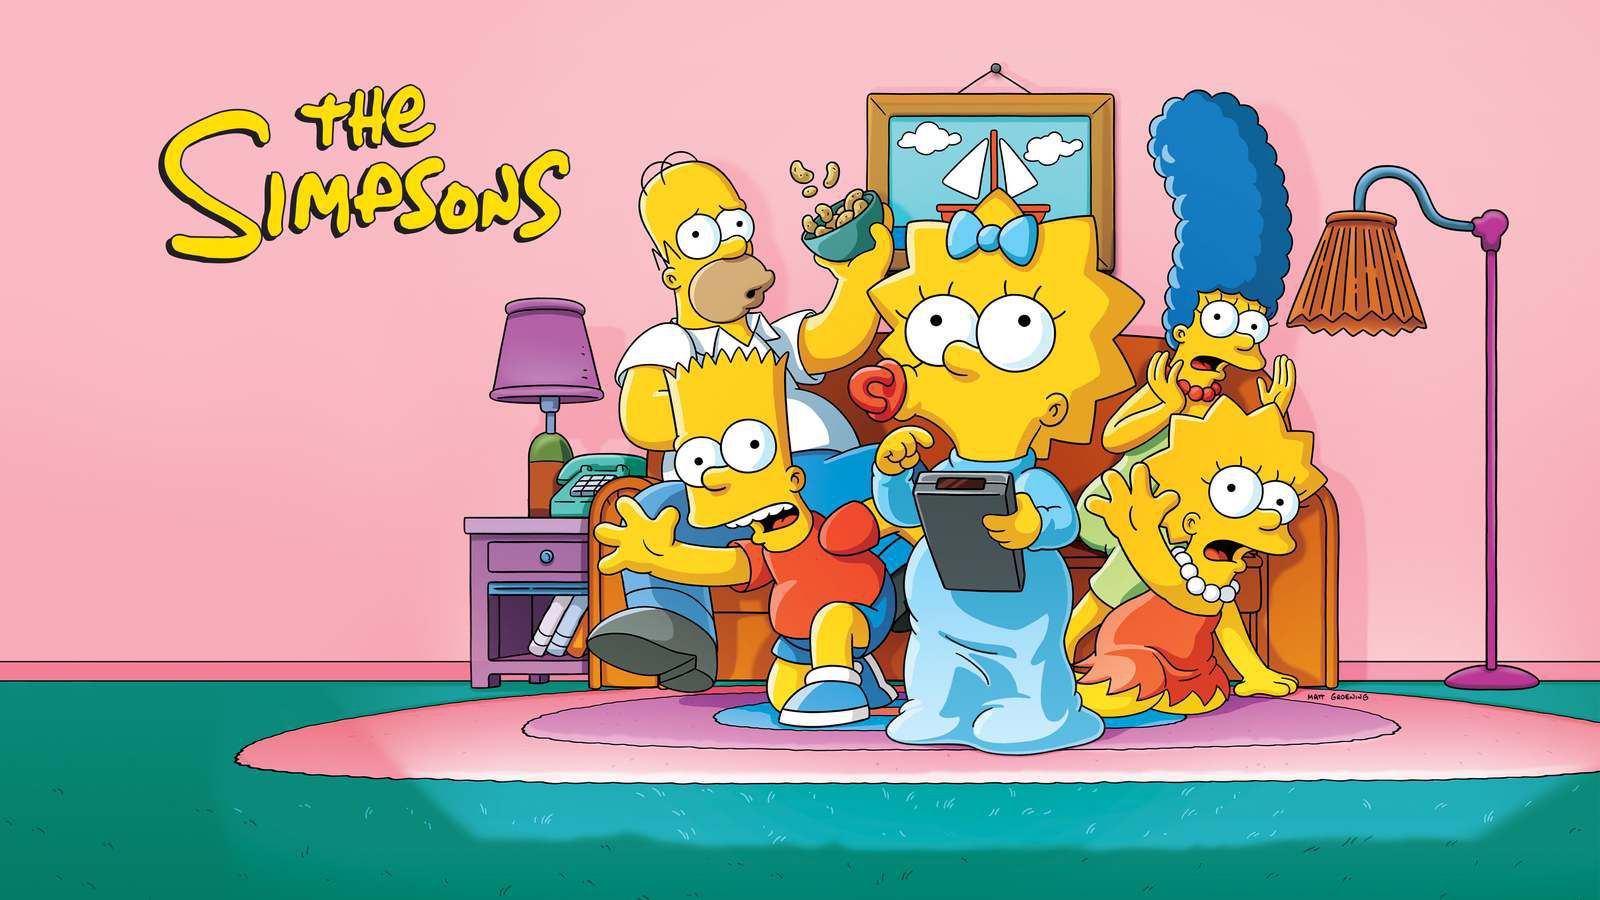 The Simpsons celebrates 750th episode with 750 characters in the opening credits sequence (VIDEO)